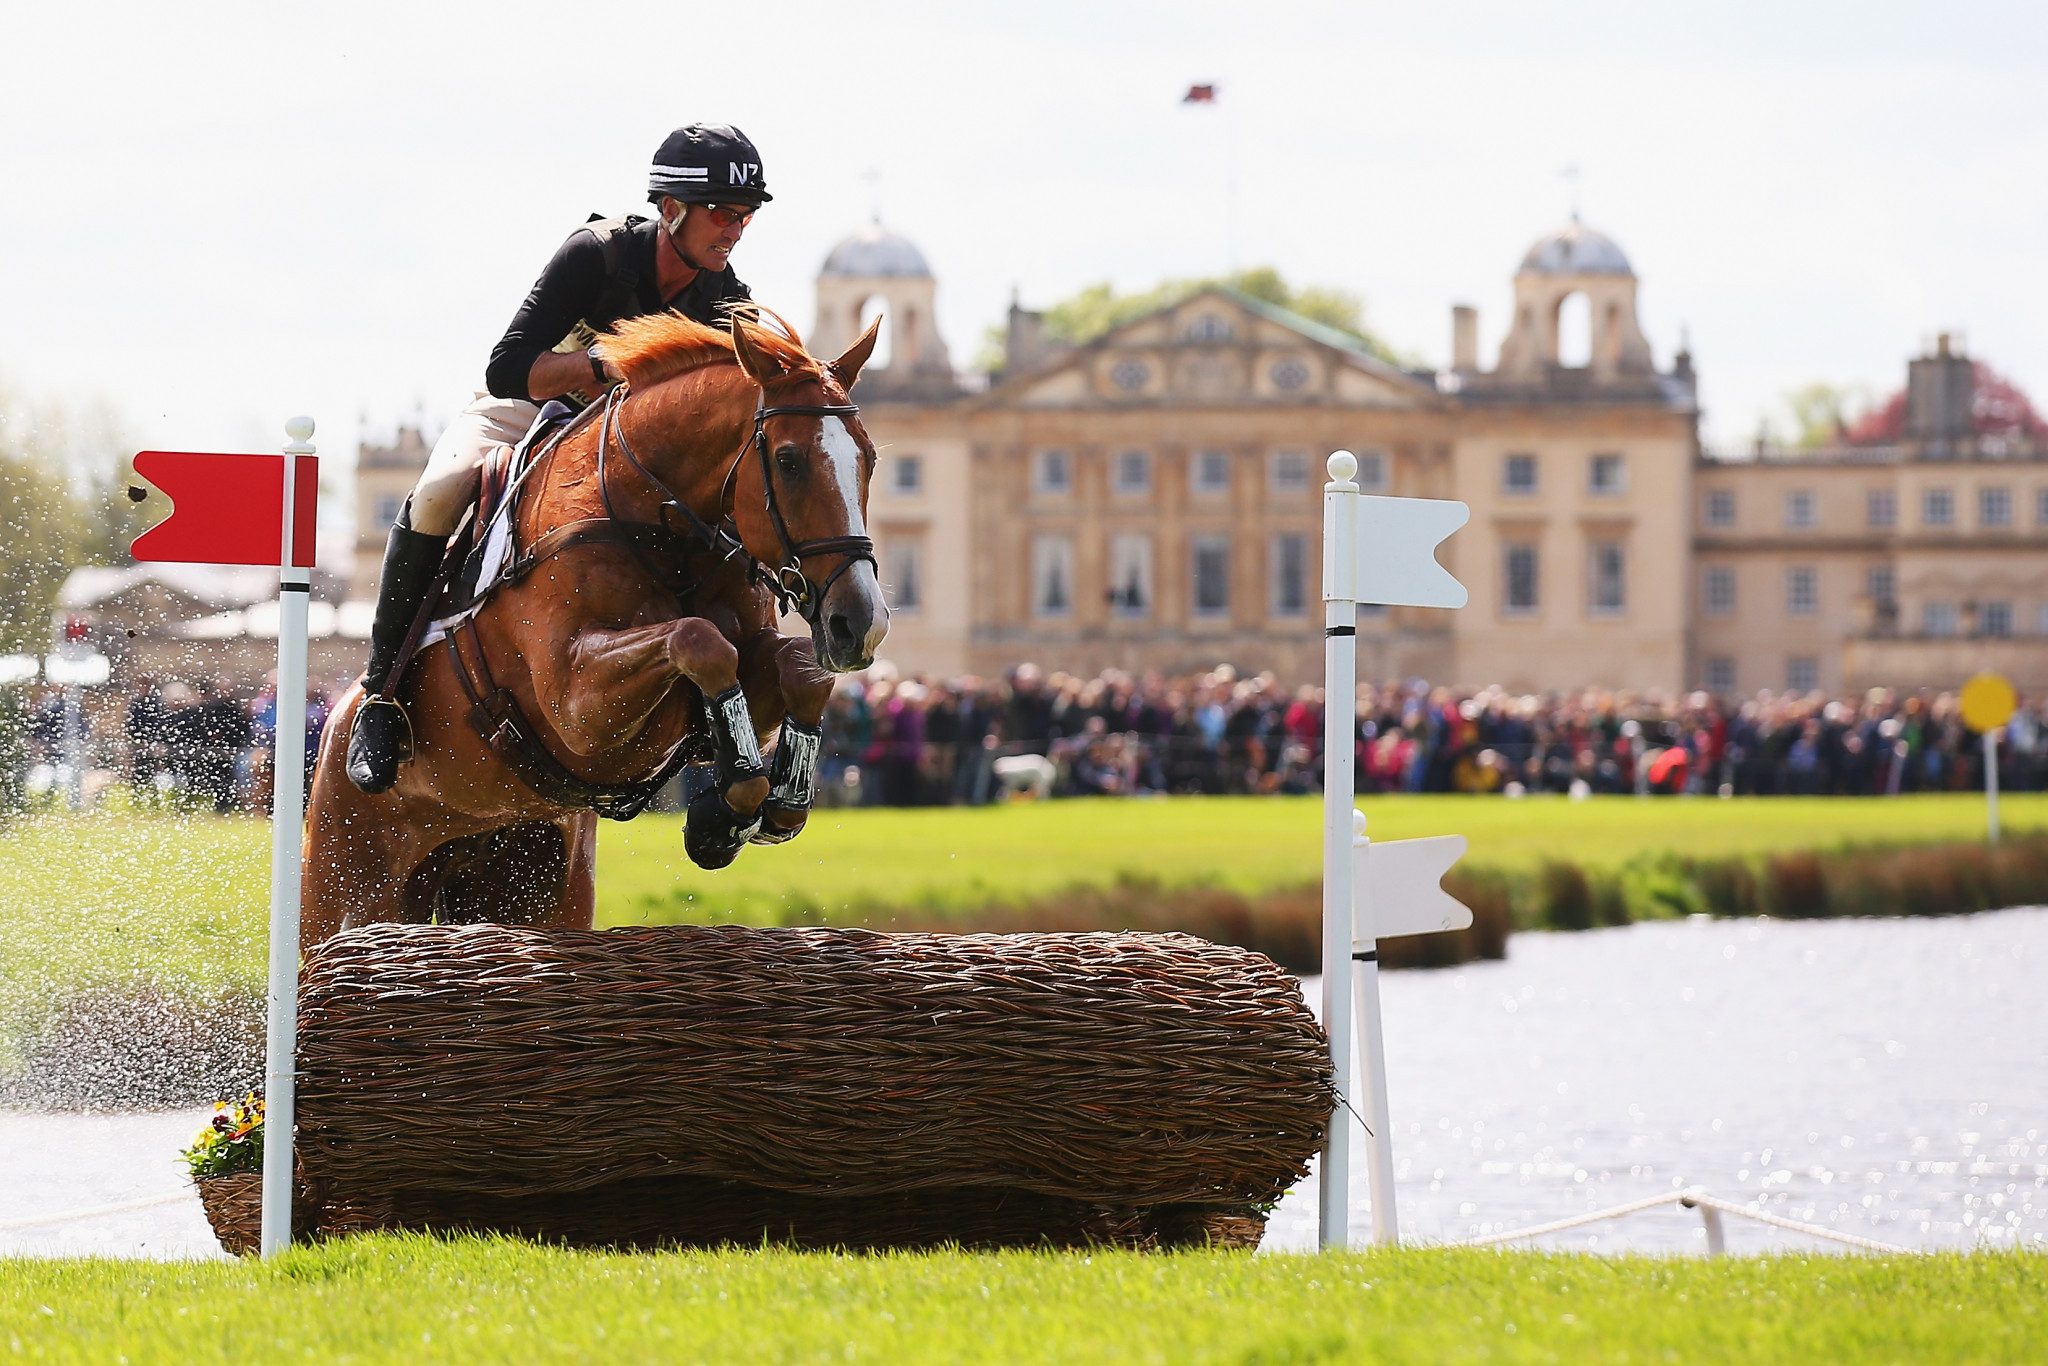 The Badminton Horse Trials are scheduled to begin tomorrow in Gloucestershire ©Getty Images